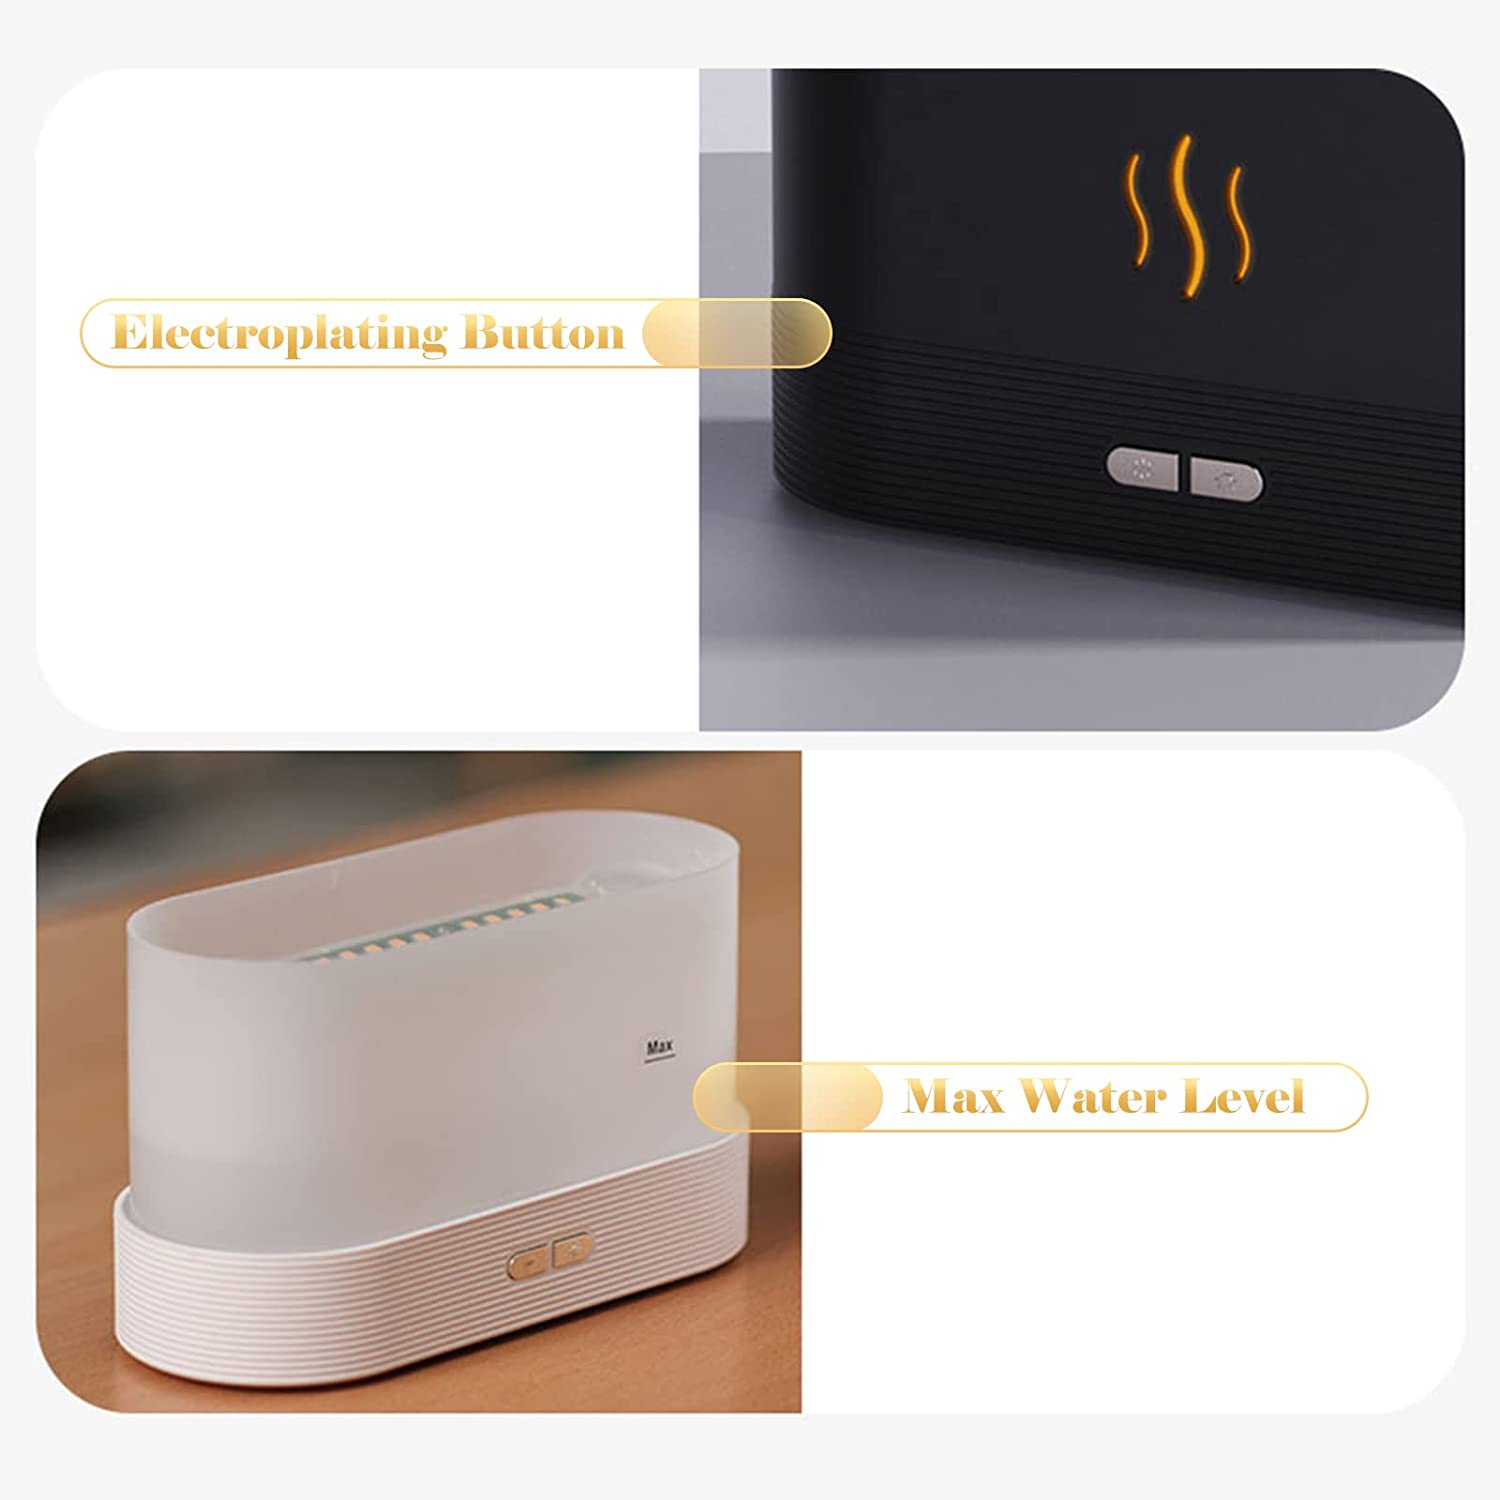 Simulation Flame Night Light Mist Air Humidifier Aromatherapy Diffuser